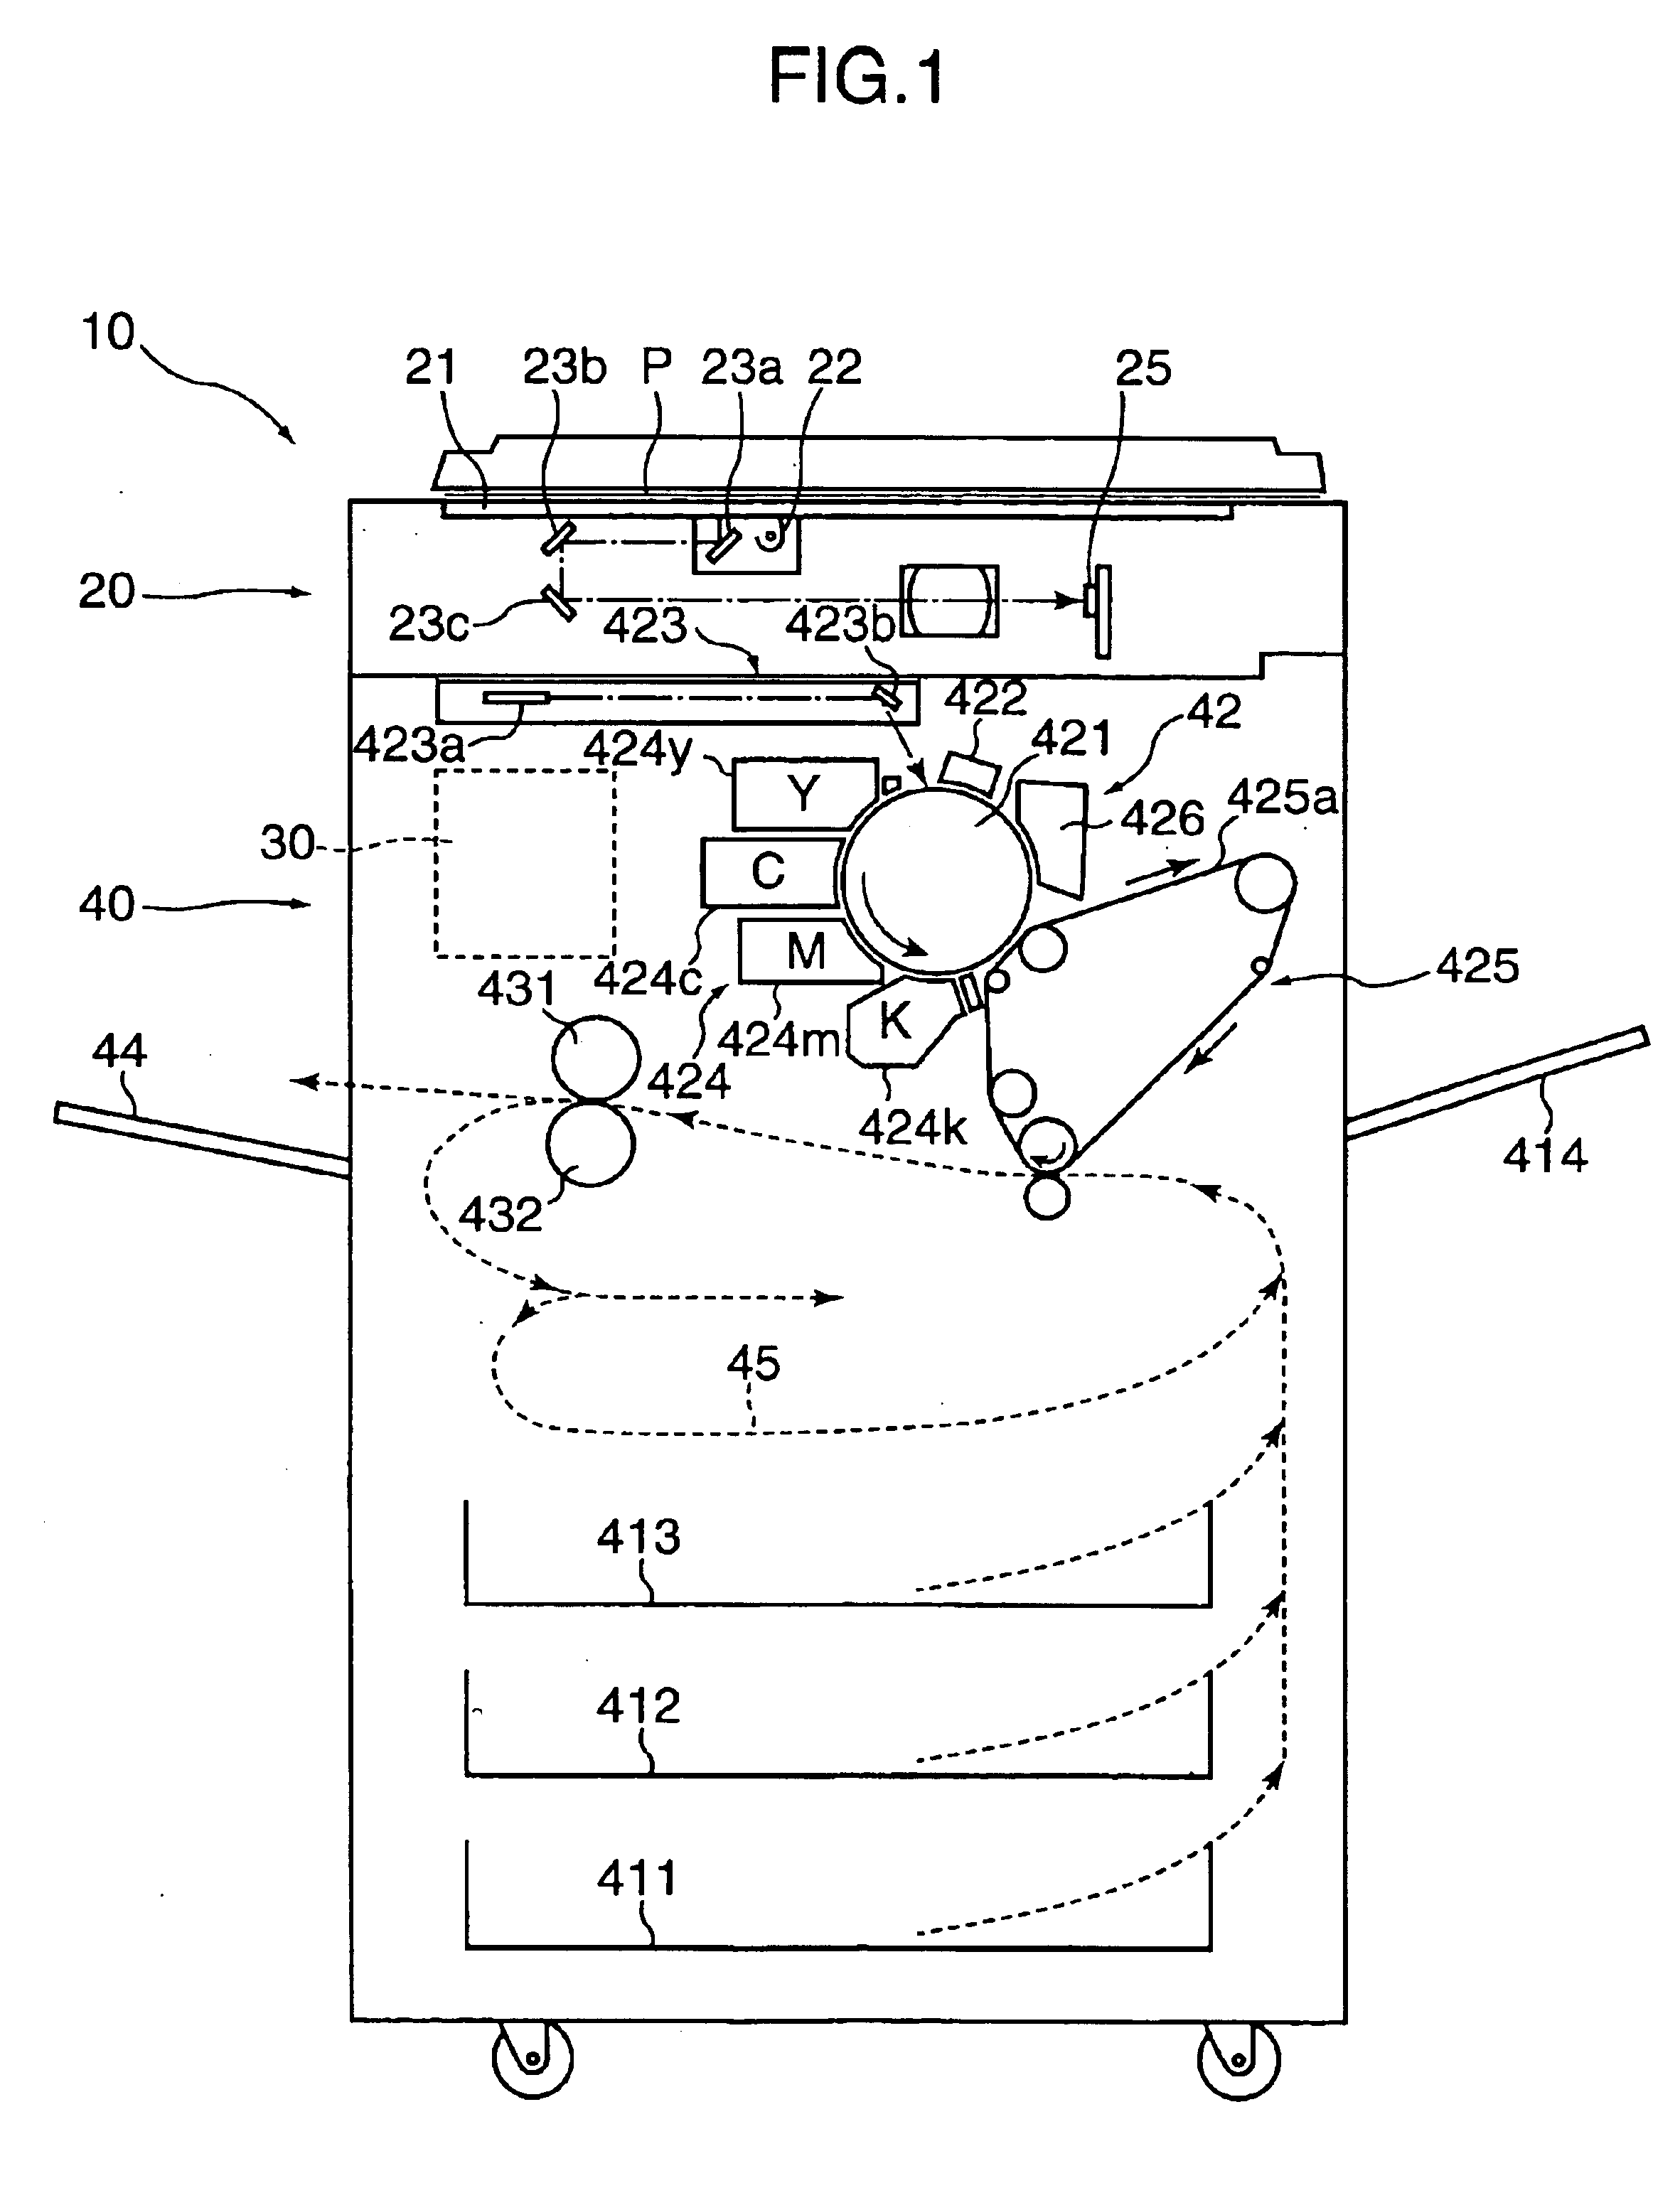 Image processing device for correcting gradation of color image